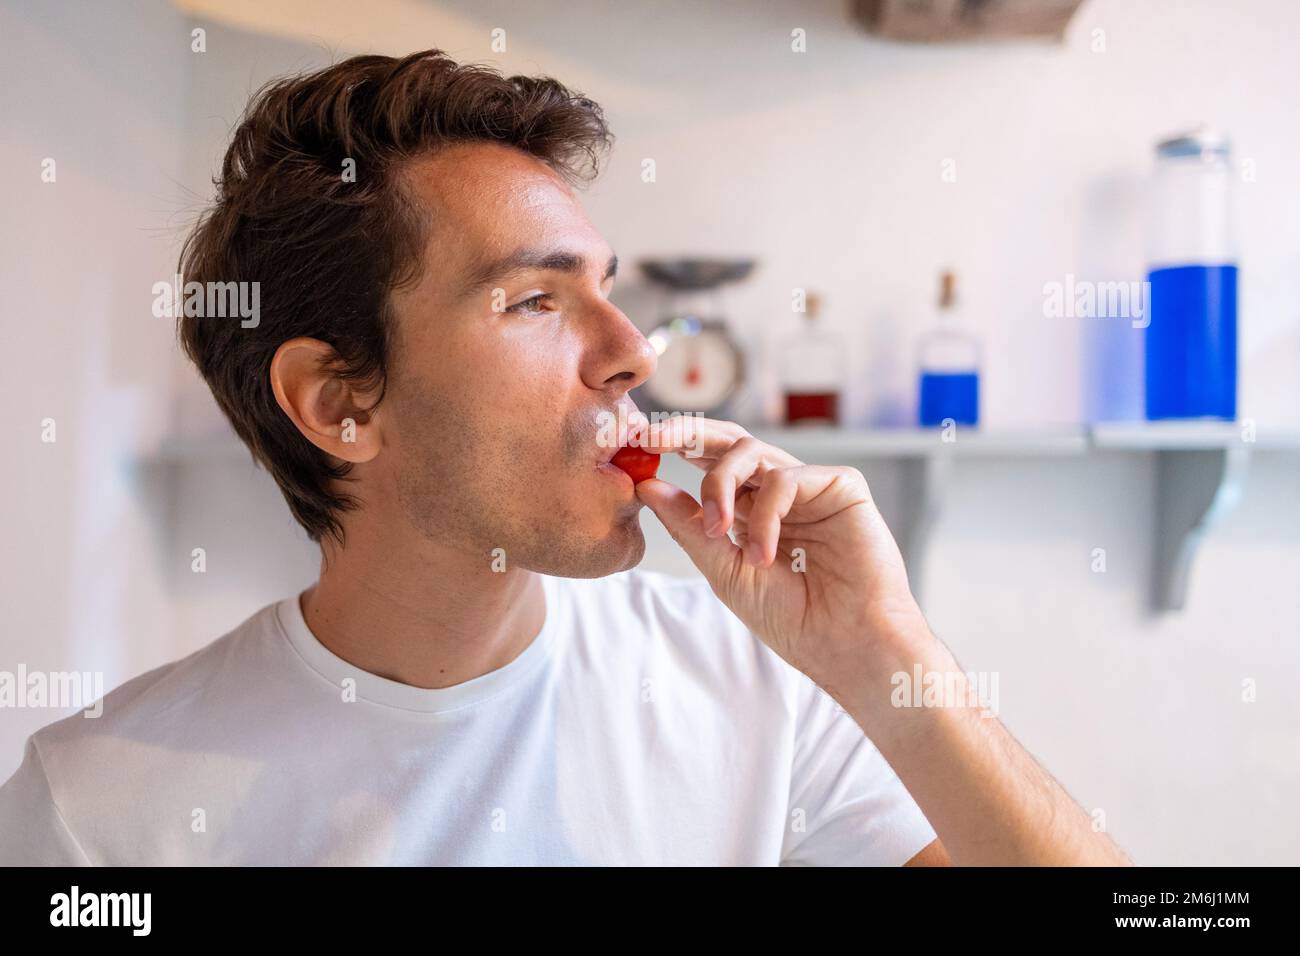 Young man eating a fresh cherry tomato Stock Photo